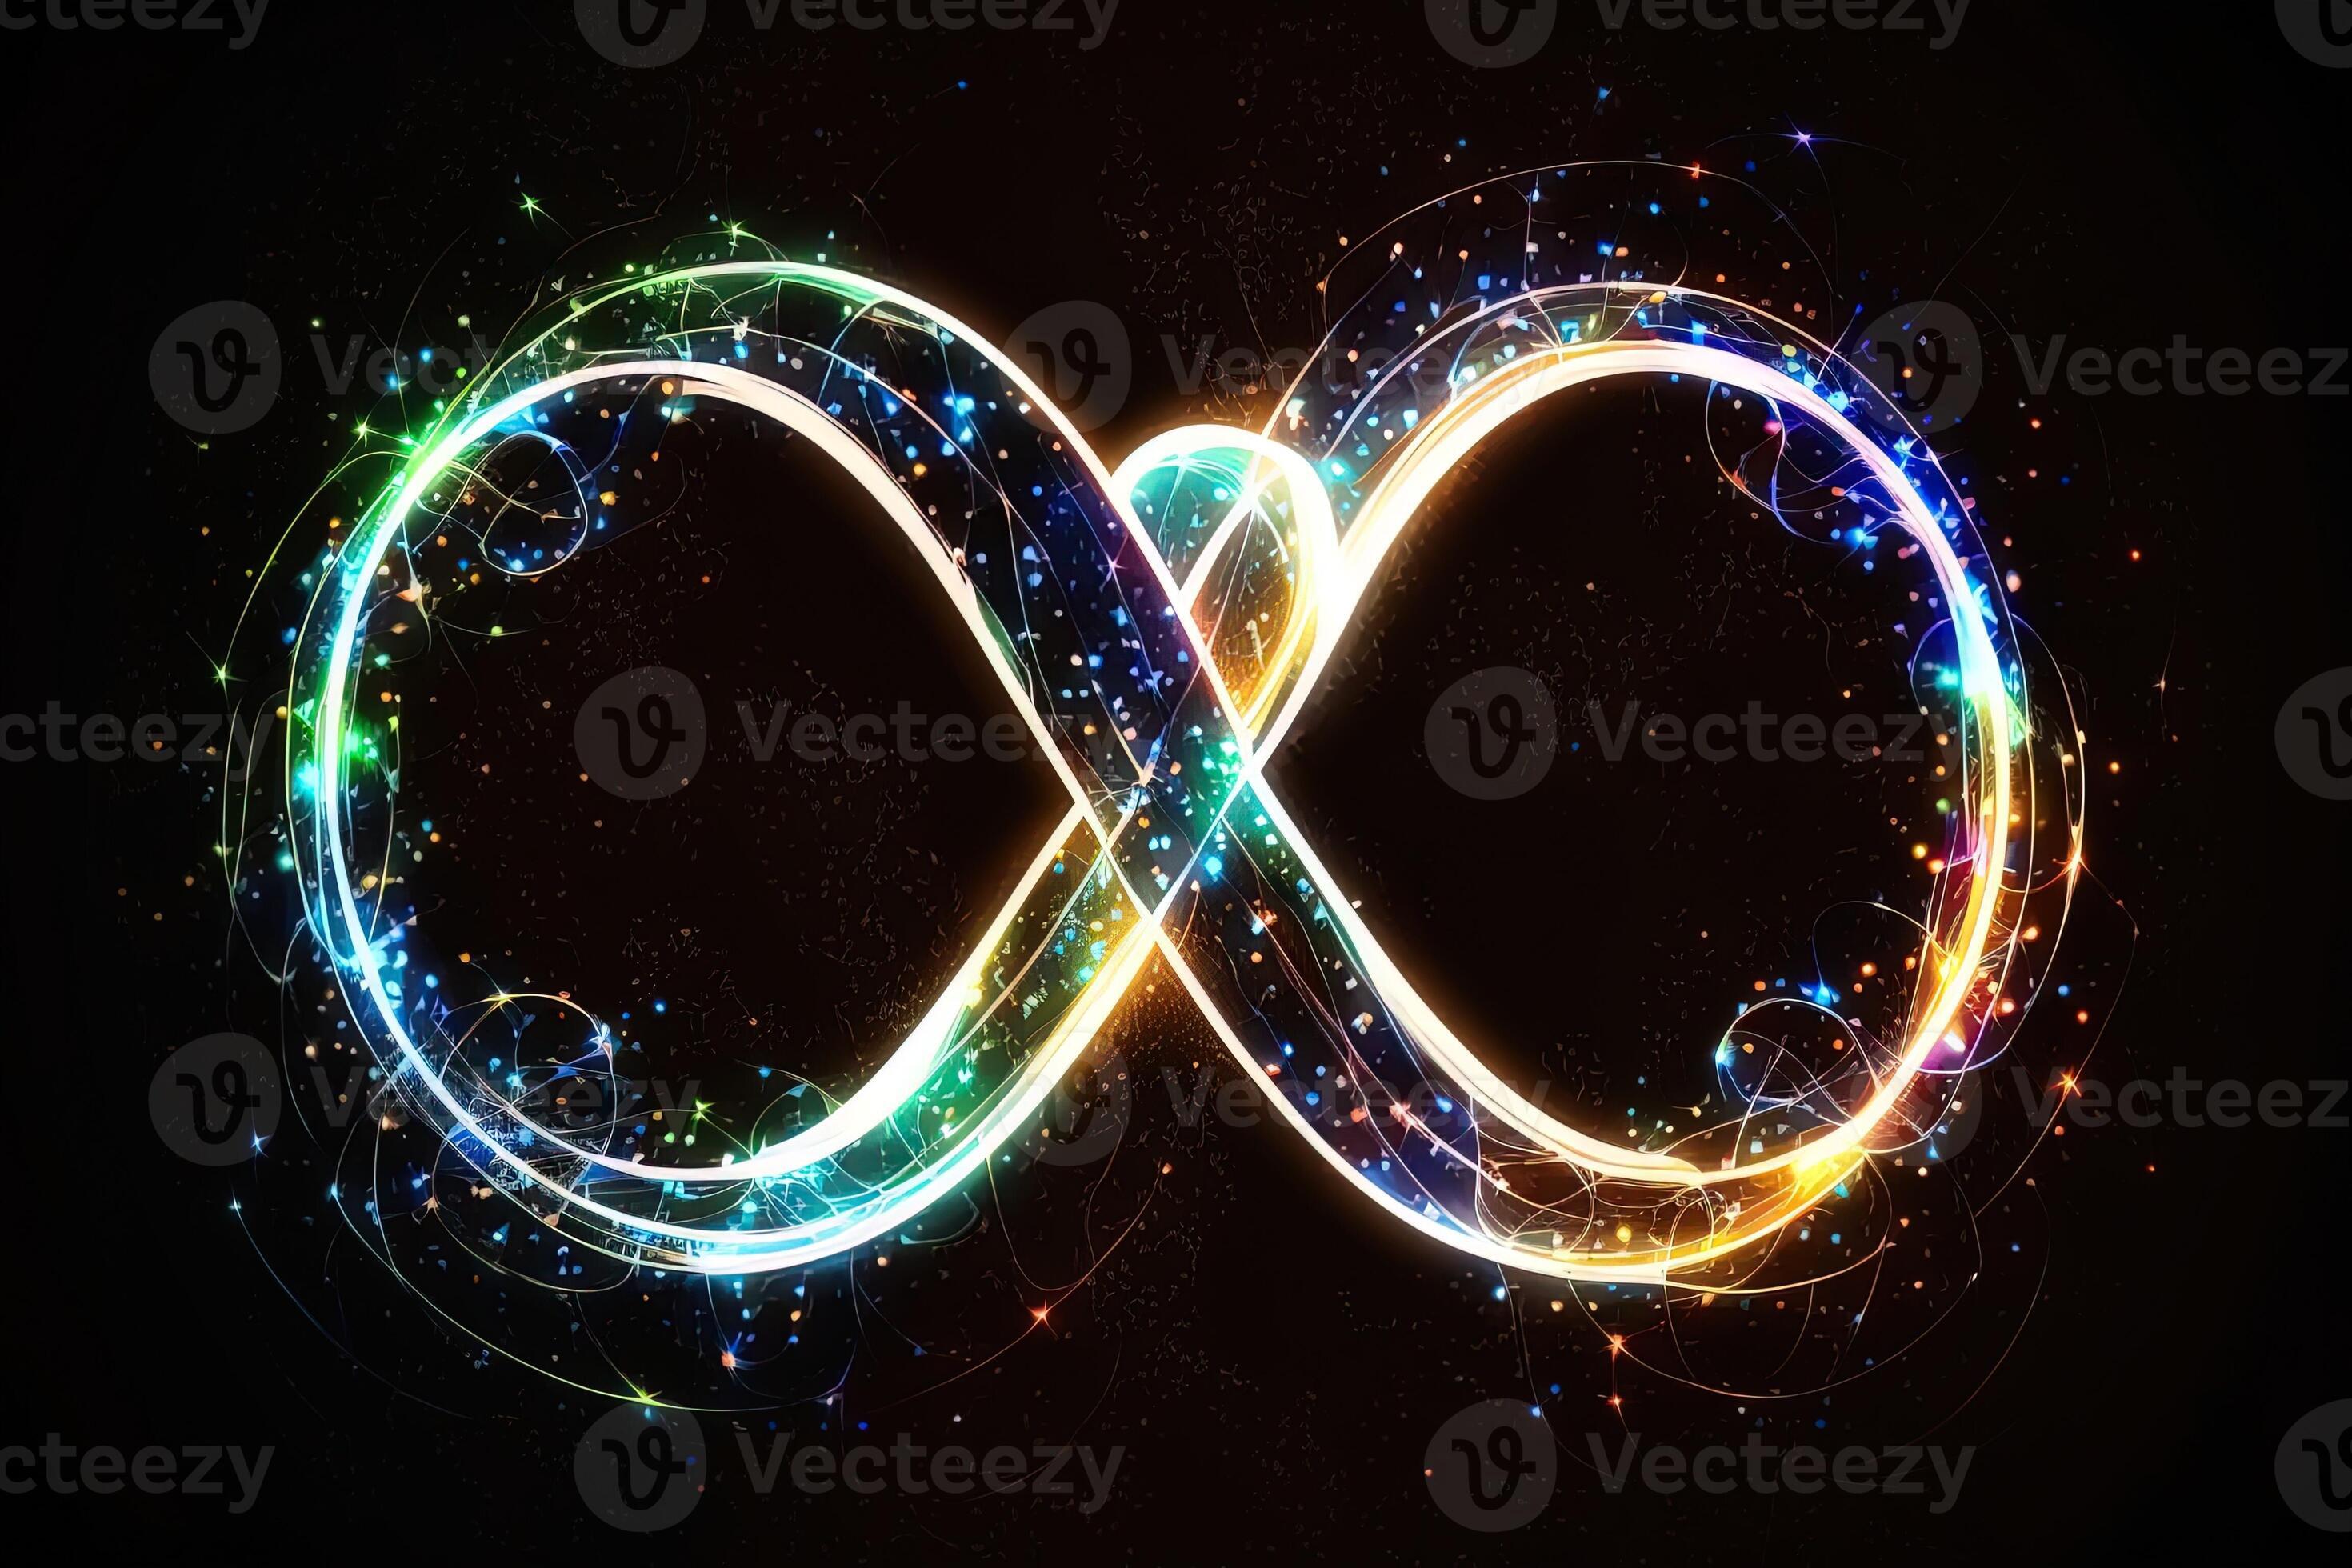 Neon Infinity Symbol Endless Love Heart Stock Footage Video (100%  Royalty-free) 1067344084